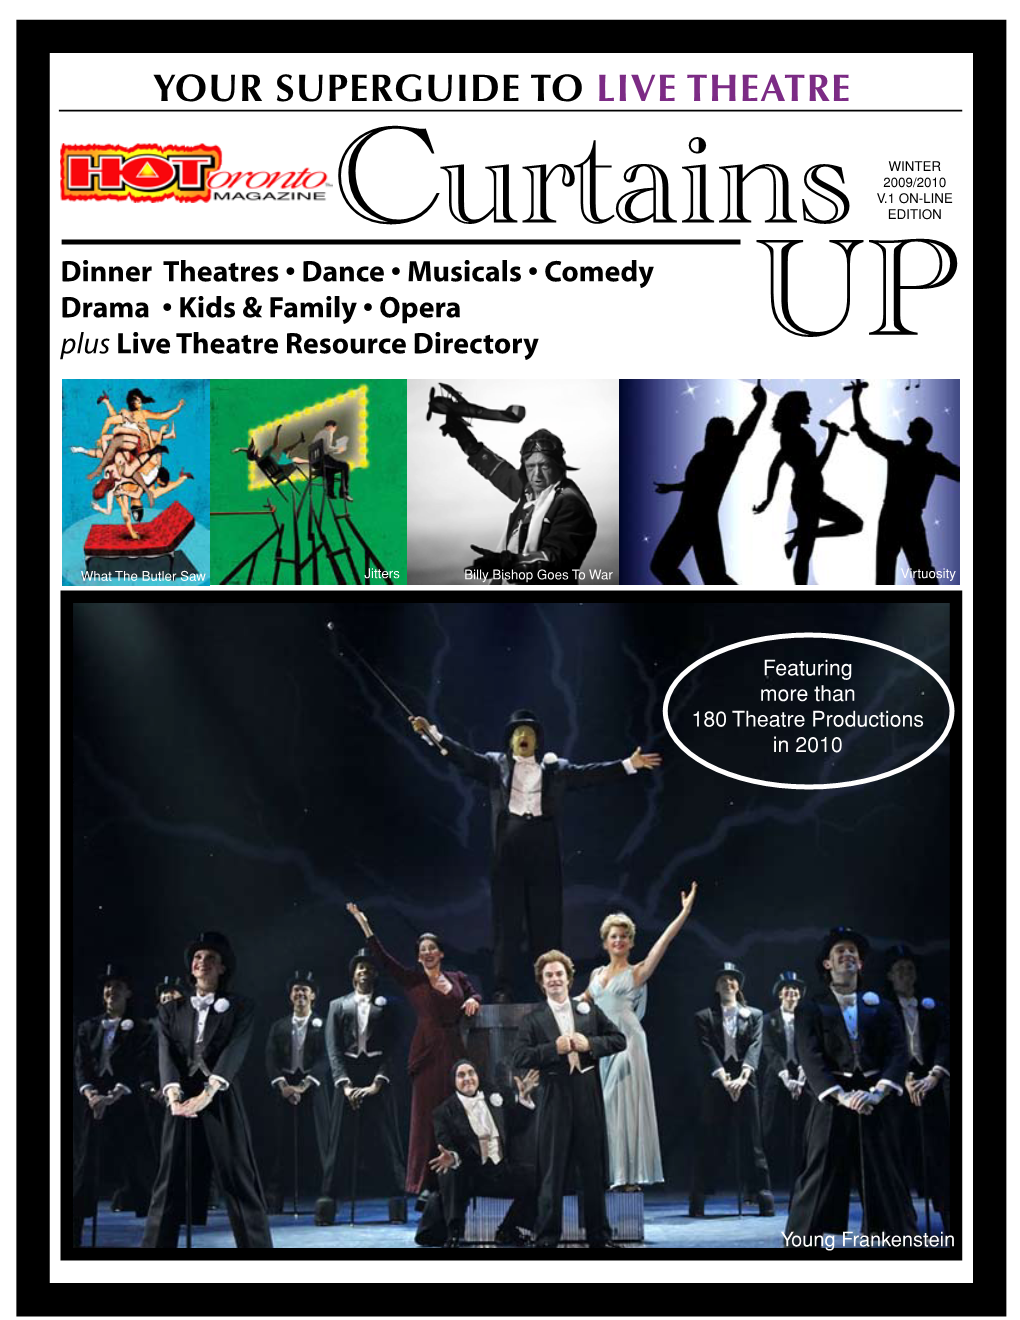 2009/2010 V.1 ON-LINE Curtains EDITION Dinner Theatres • Dance • Musicals • Comedy Drama • Kids & Family • Opera Plus Live Theatre Resource Directory UP